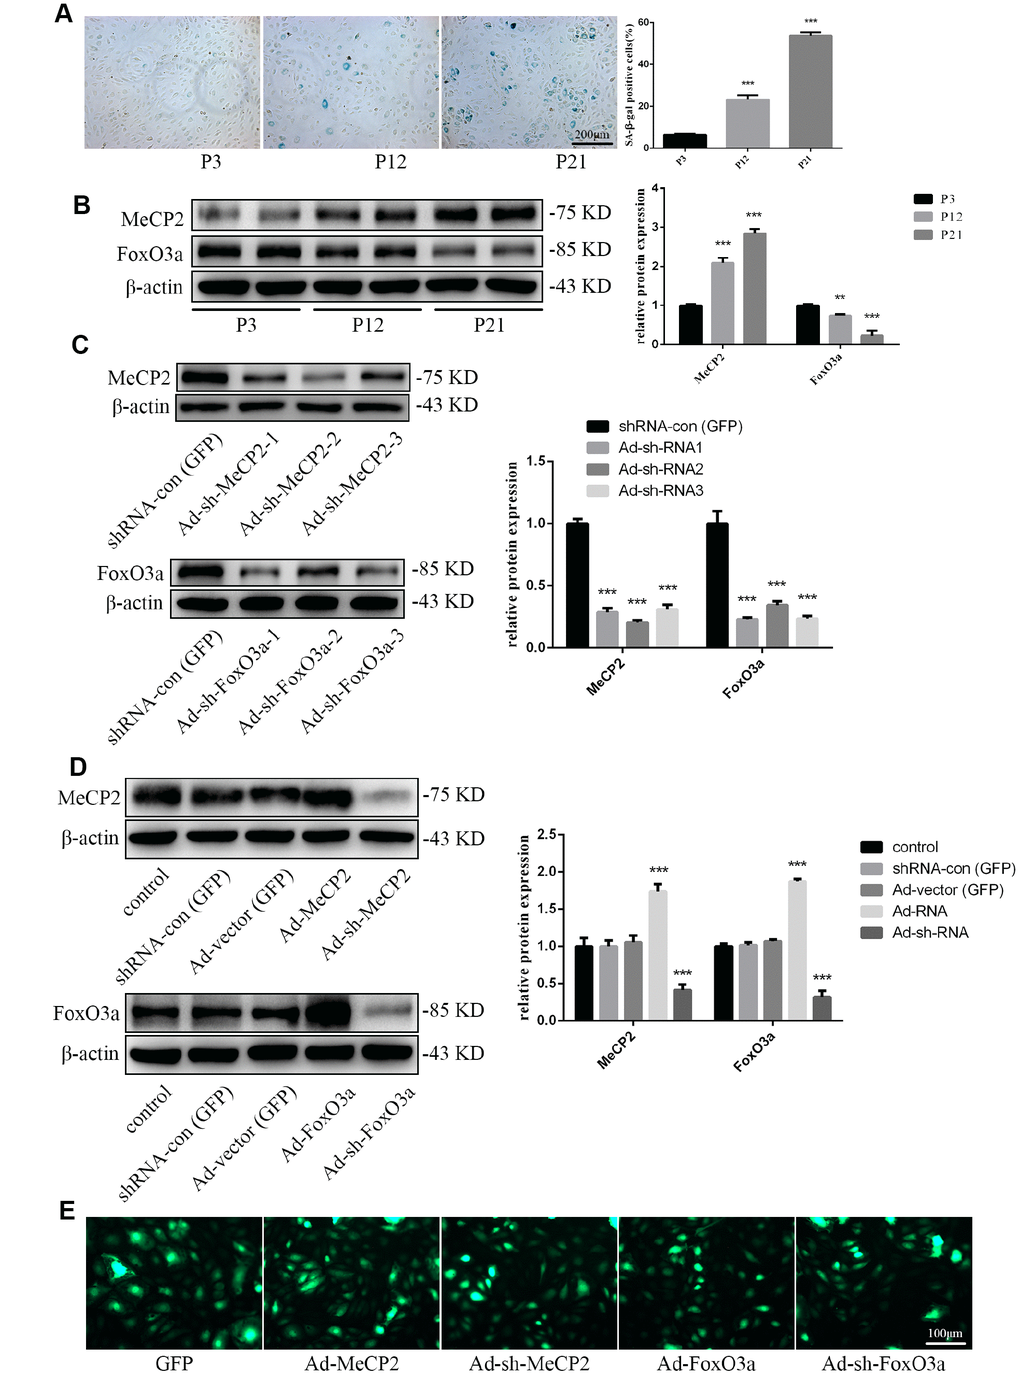 Protein expression during replicative aging and the efficacy of adenoviral vectors containing interference sequences. (A) Senescence-associated beta-galactosidase (SA-β-gal) staining during P3, P12, and P21 confirmed the increasing rate of aging EPCs during replicative senescence. (B) Protein levels of MeCP2 and FoxO3a were detected by western blotting during replicative senescence. (C) Protein levels of MeCP2 and FoxO3a were detected by western blotting after transfection with Ad-sh-MeCP2 or Ad-sh-FoxO3a. (D) Protein levels of MeCP2 and FoxO3a were detected by western blotting after overexpression and silencing of MeCP2 or FoxO3a. (E) Efficacy of adenoviral vectors was confirmed under fluorescence microscopy. *P 